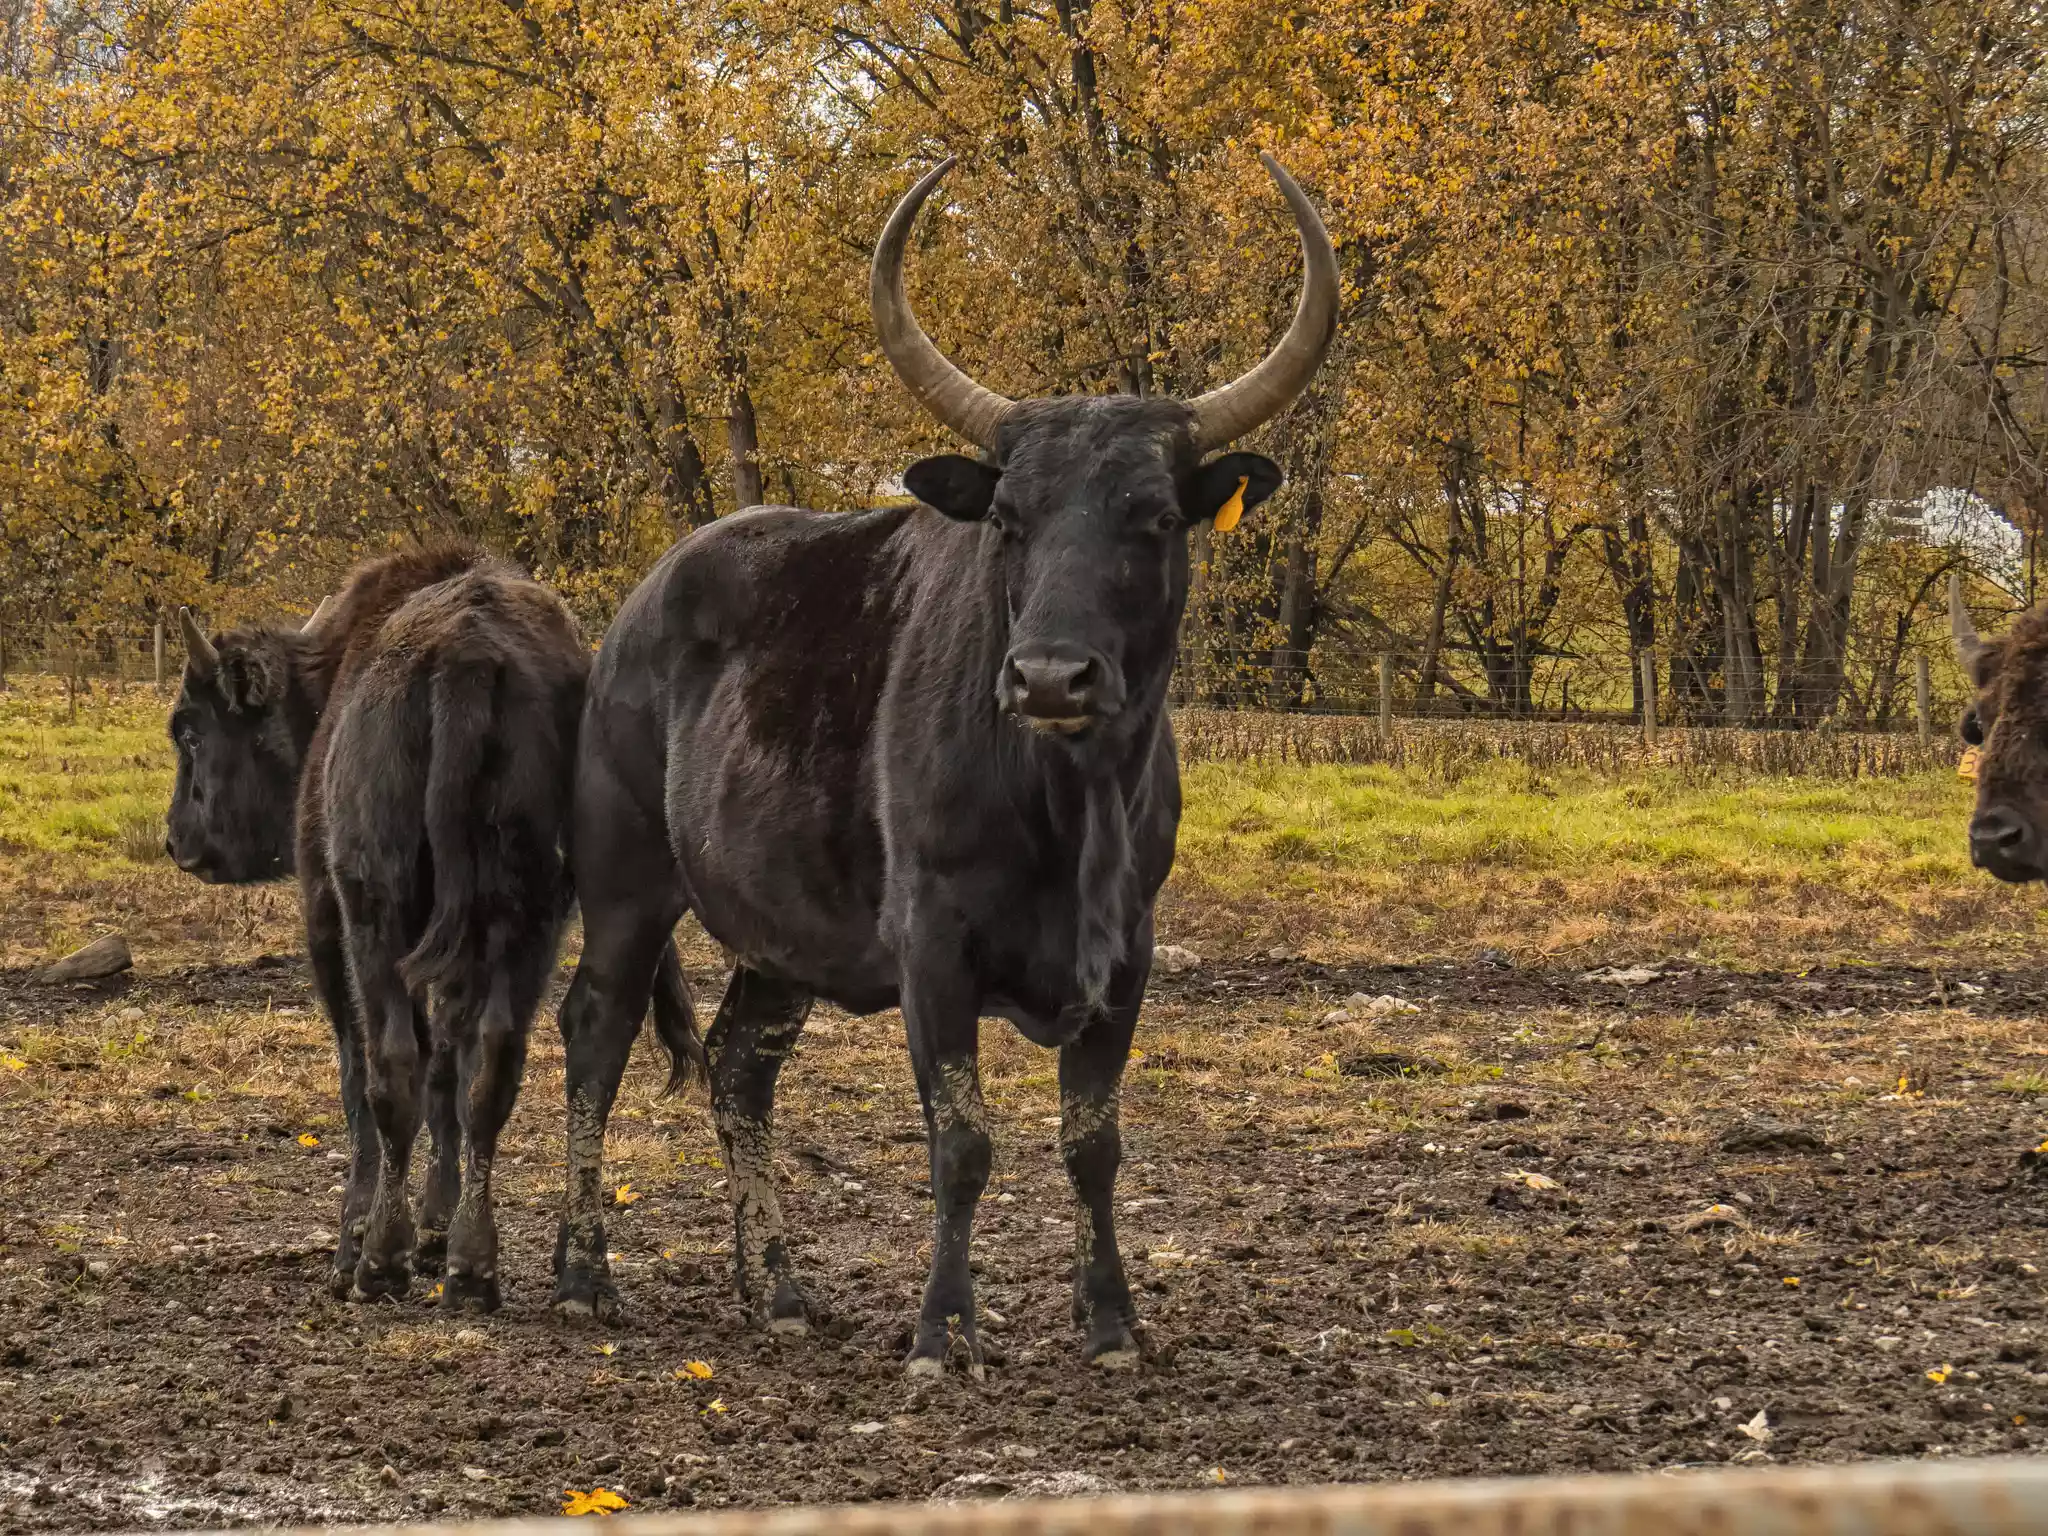 Two brown beefalo, one with horns, standing in a field with autumn foliage behind them.